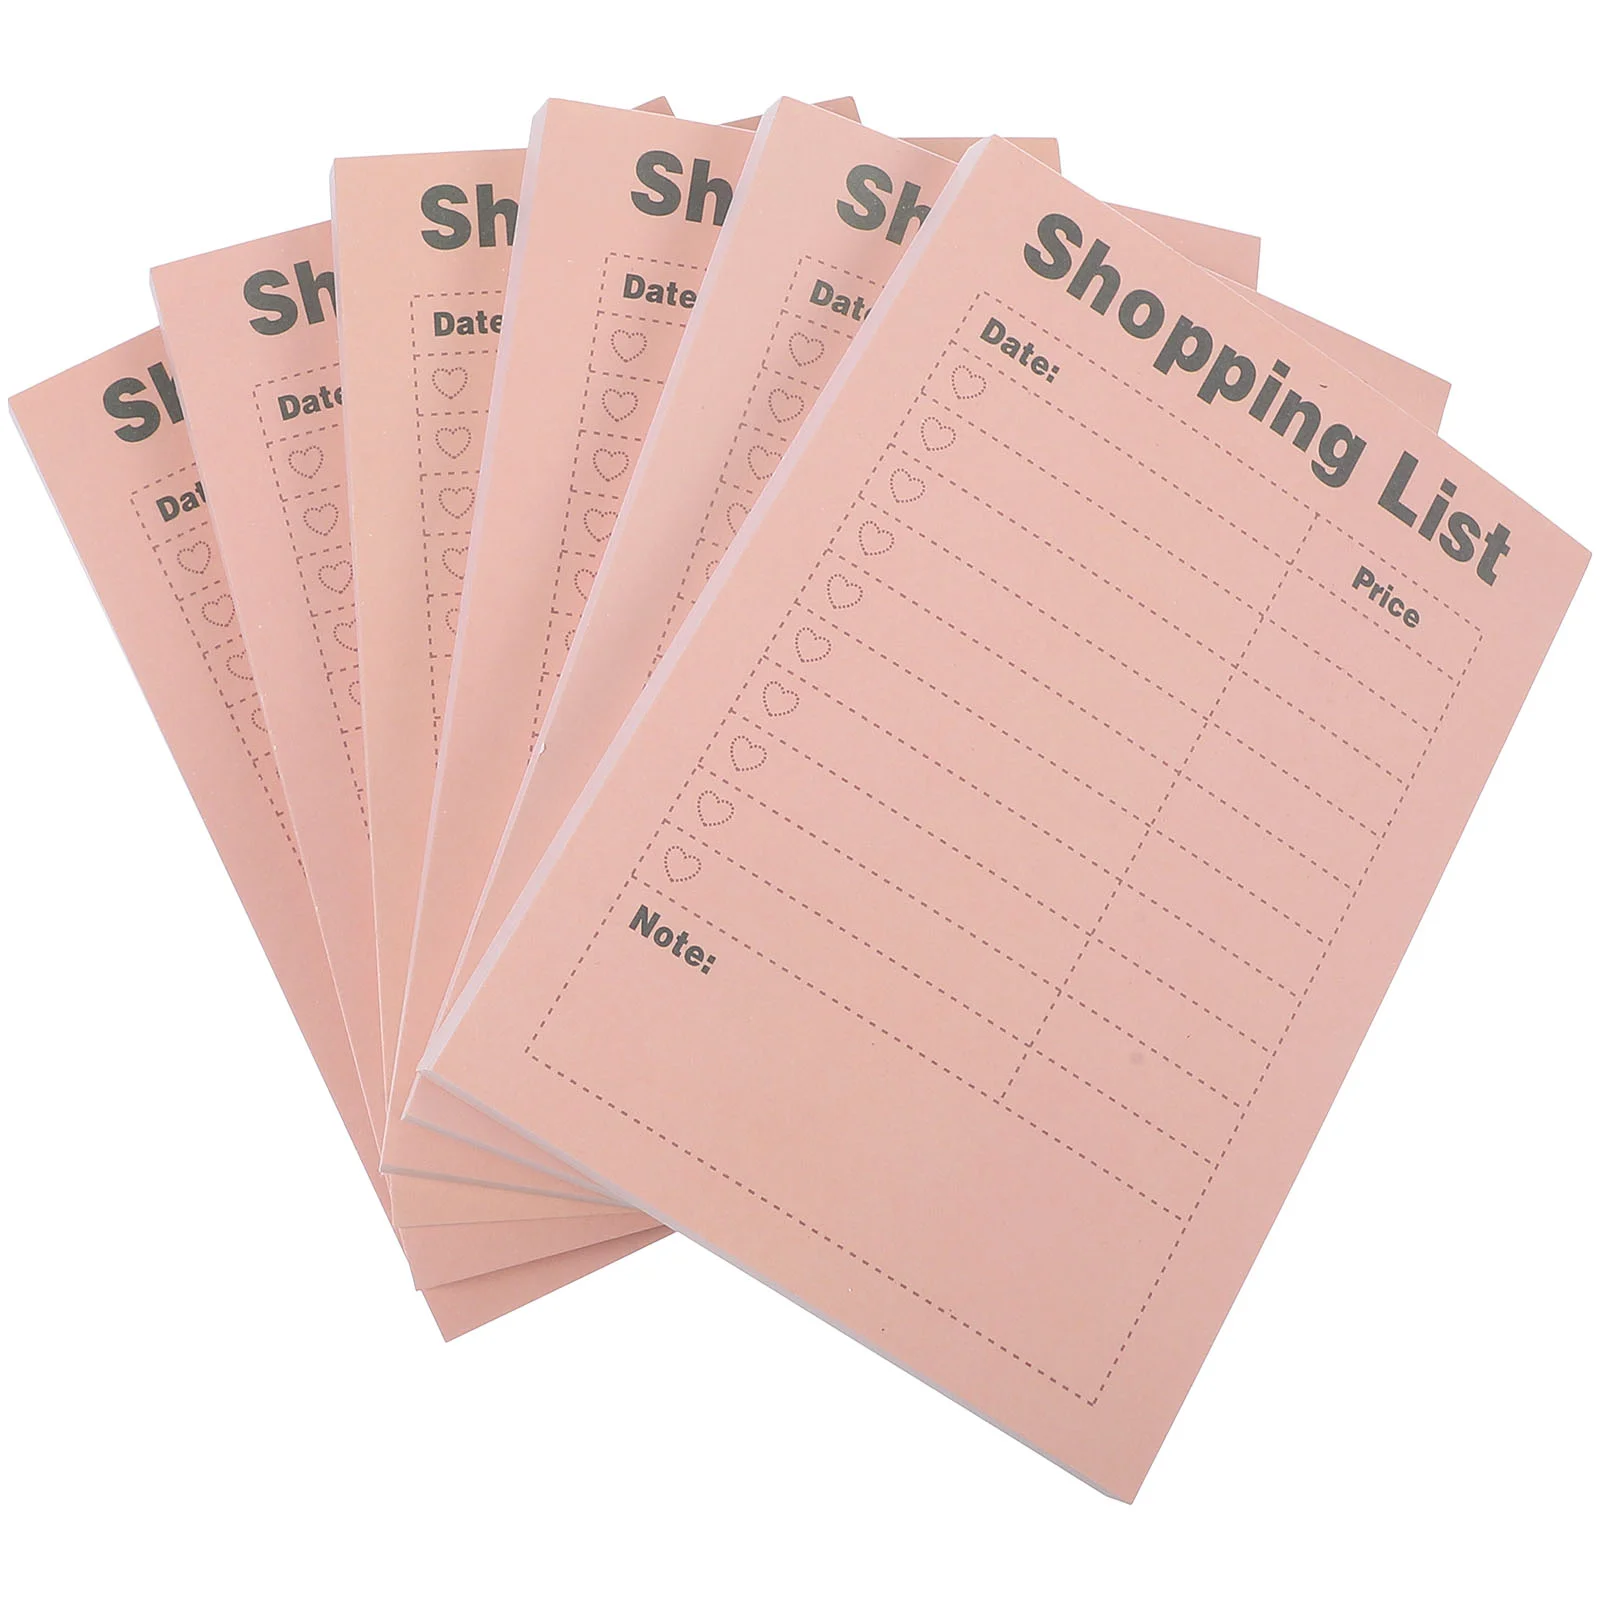 

6 Books of Grocery List Notepad Tearable Shopping List Notepad Small Memo Pad Grocery List Notebook